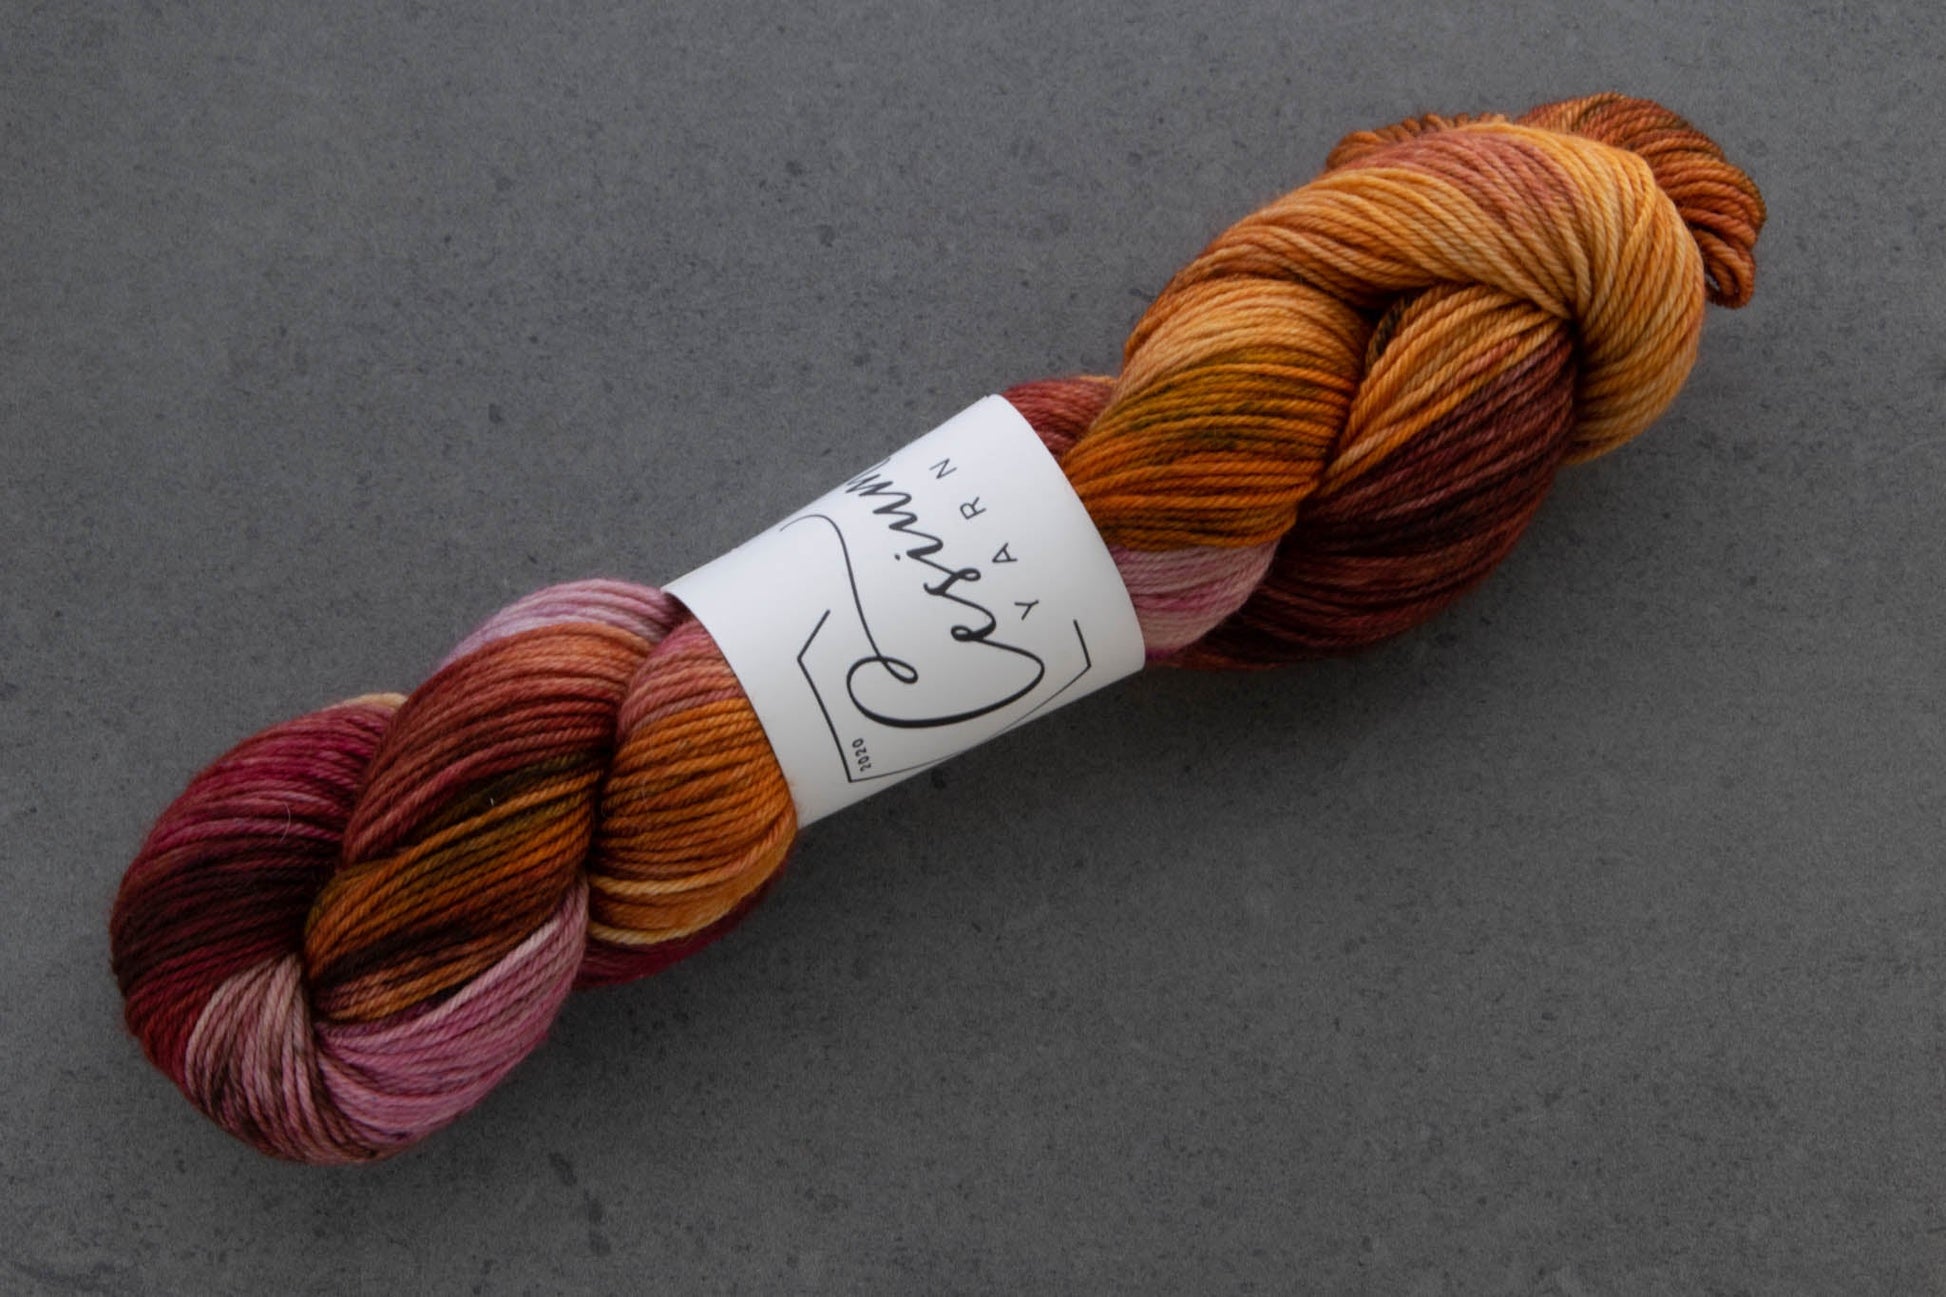 A skein of hand-dyed wool yarn with sections of orange and maroon.